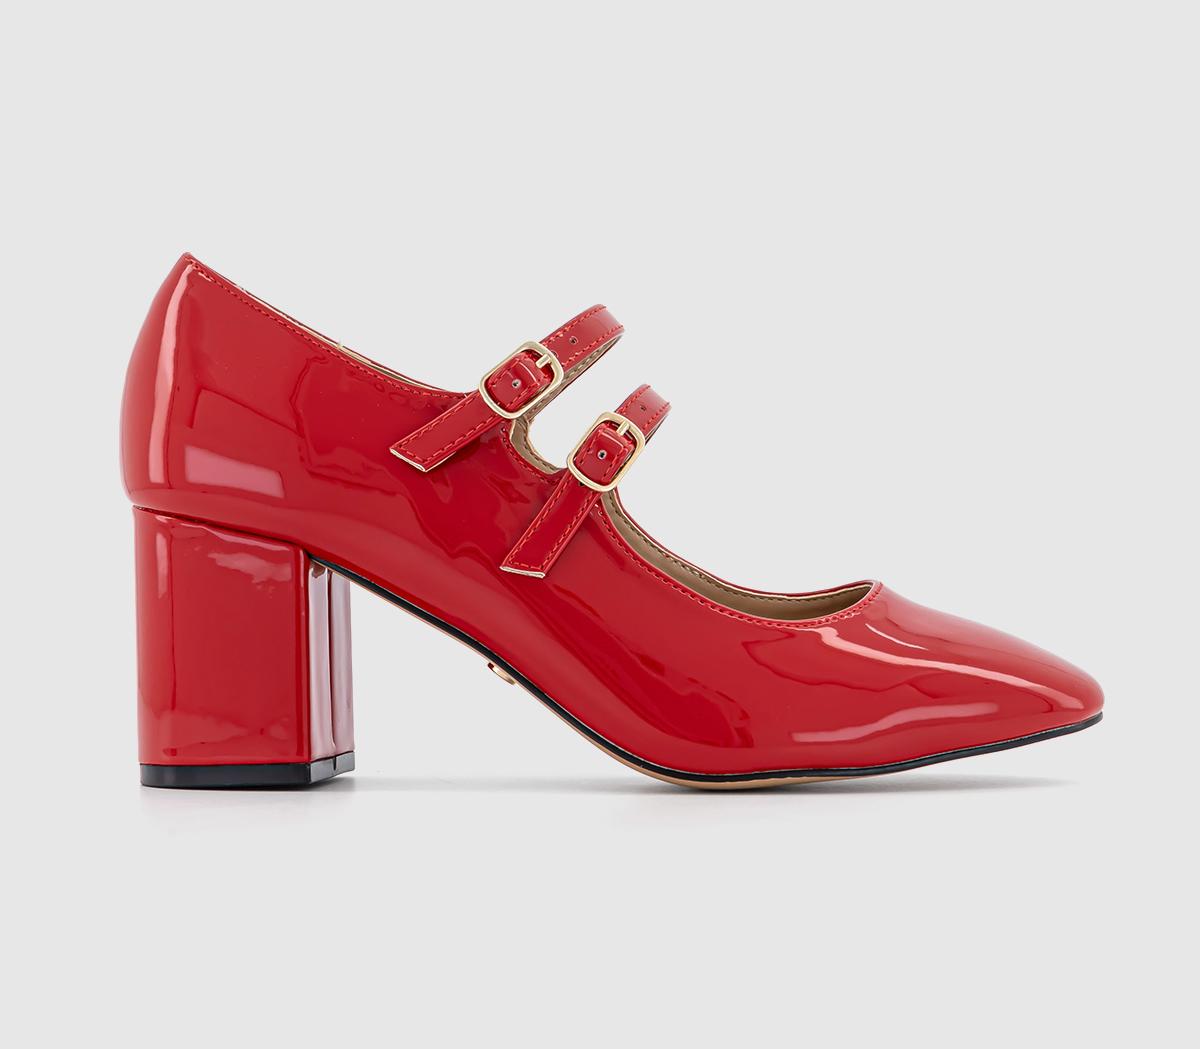 OFFICEMadame Two Strap Mary JanesRed Patent